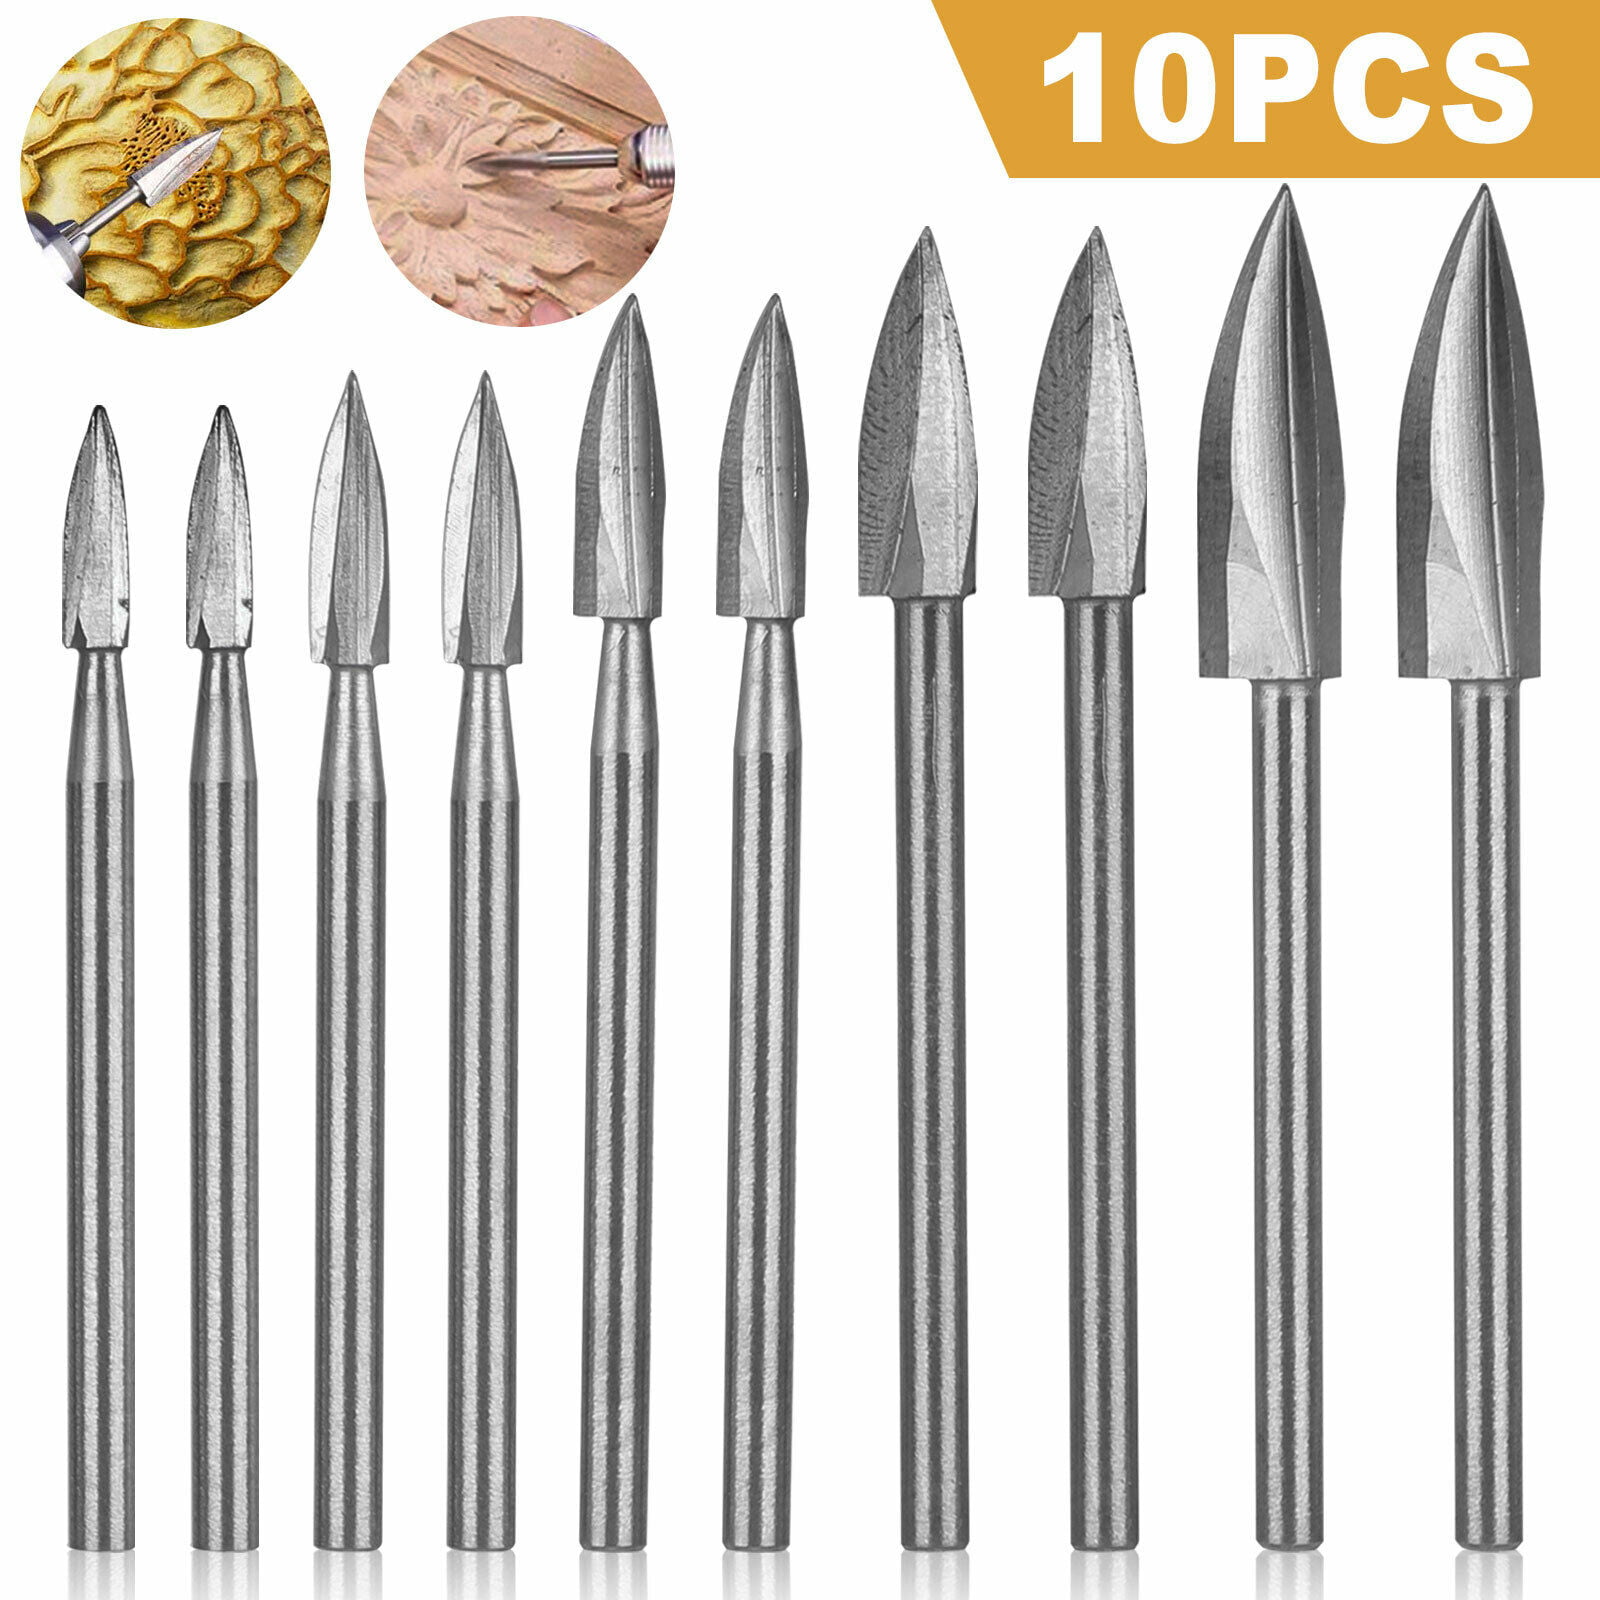 10x Wood Carving Engraving Drill Bits Dremel Rotary Tool Set Milling Root Cutter 